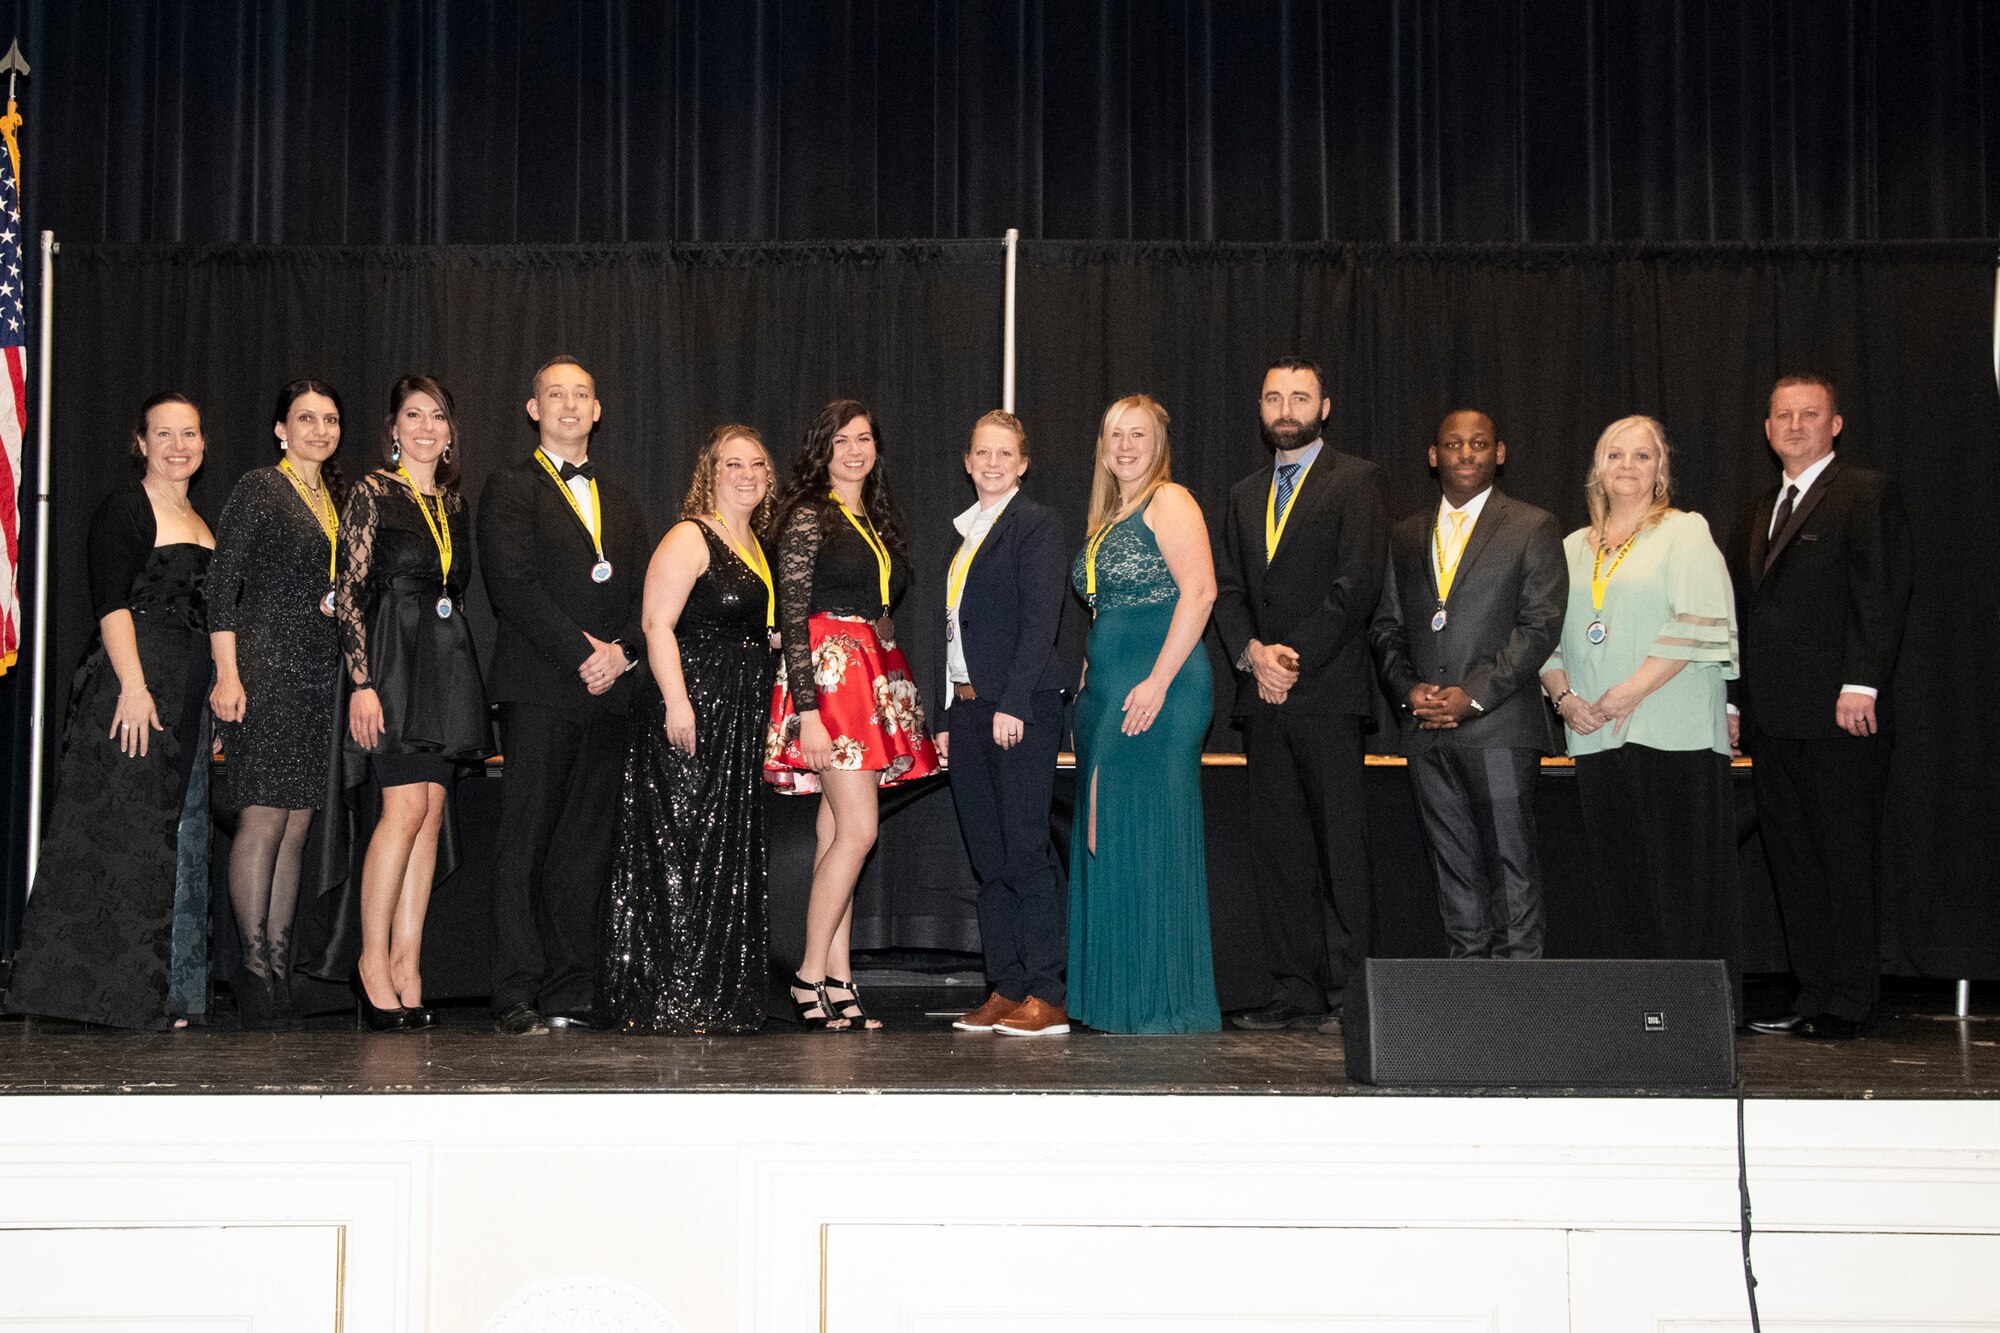 Twelve individuals and one team were recognized as the best in the wing and received the coveted eagle trophies for their respective categories.